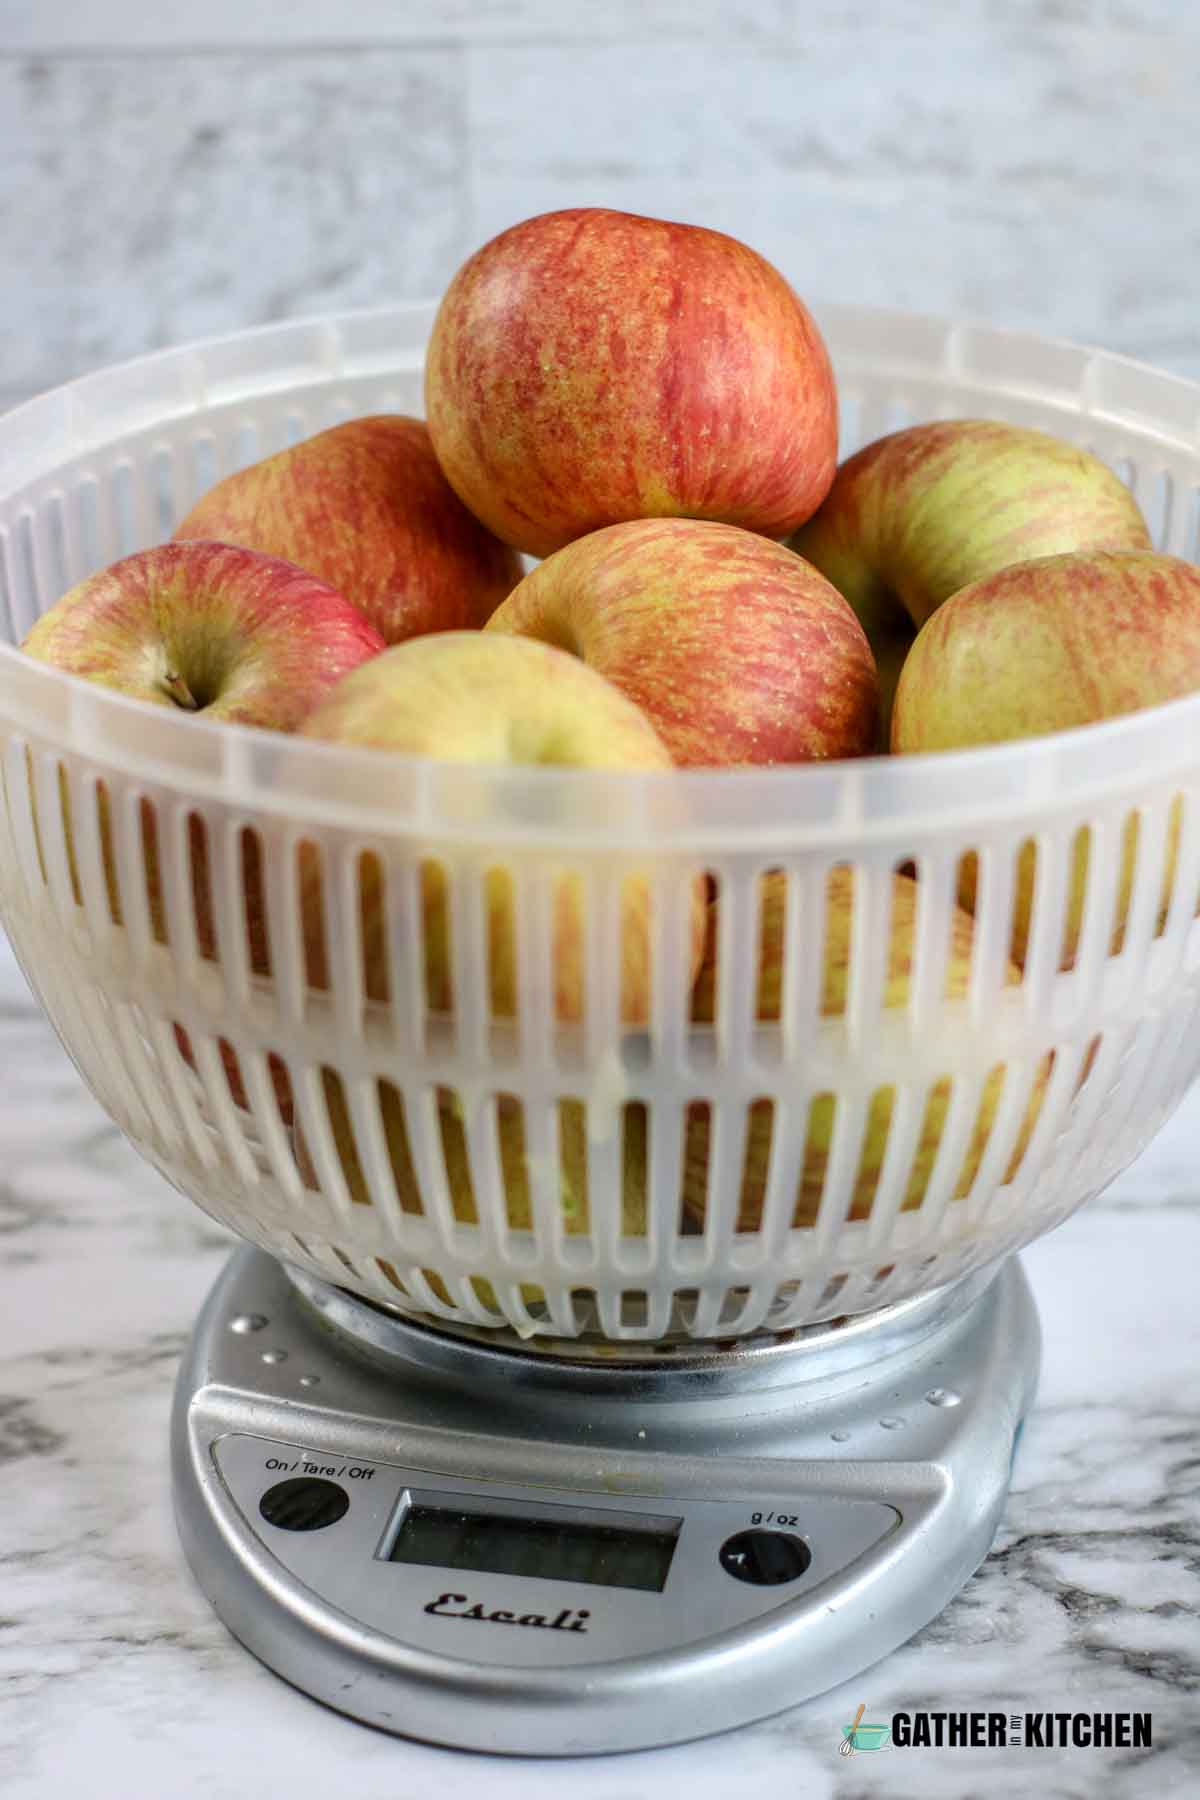 Basket of apples on scale.